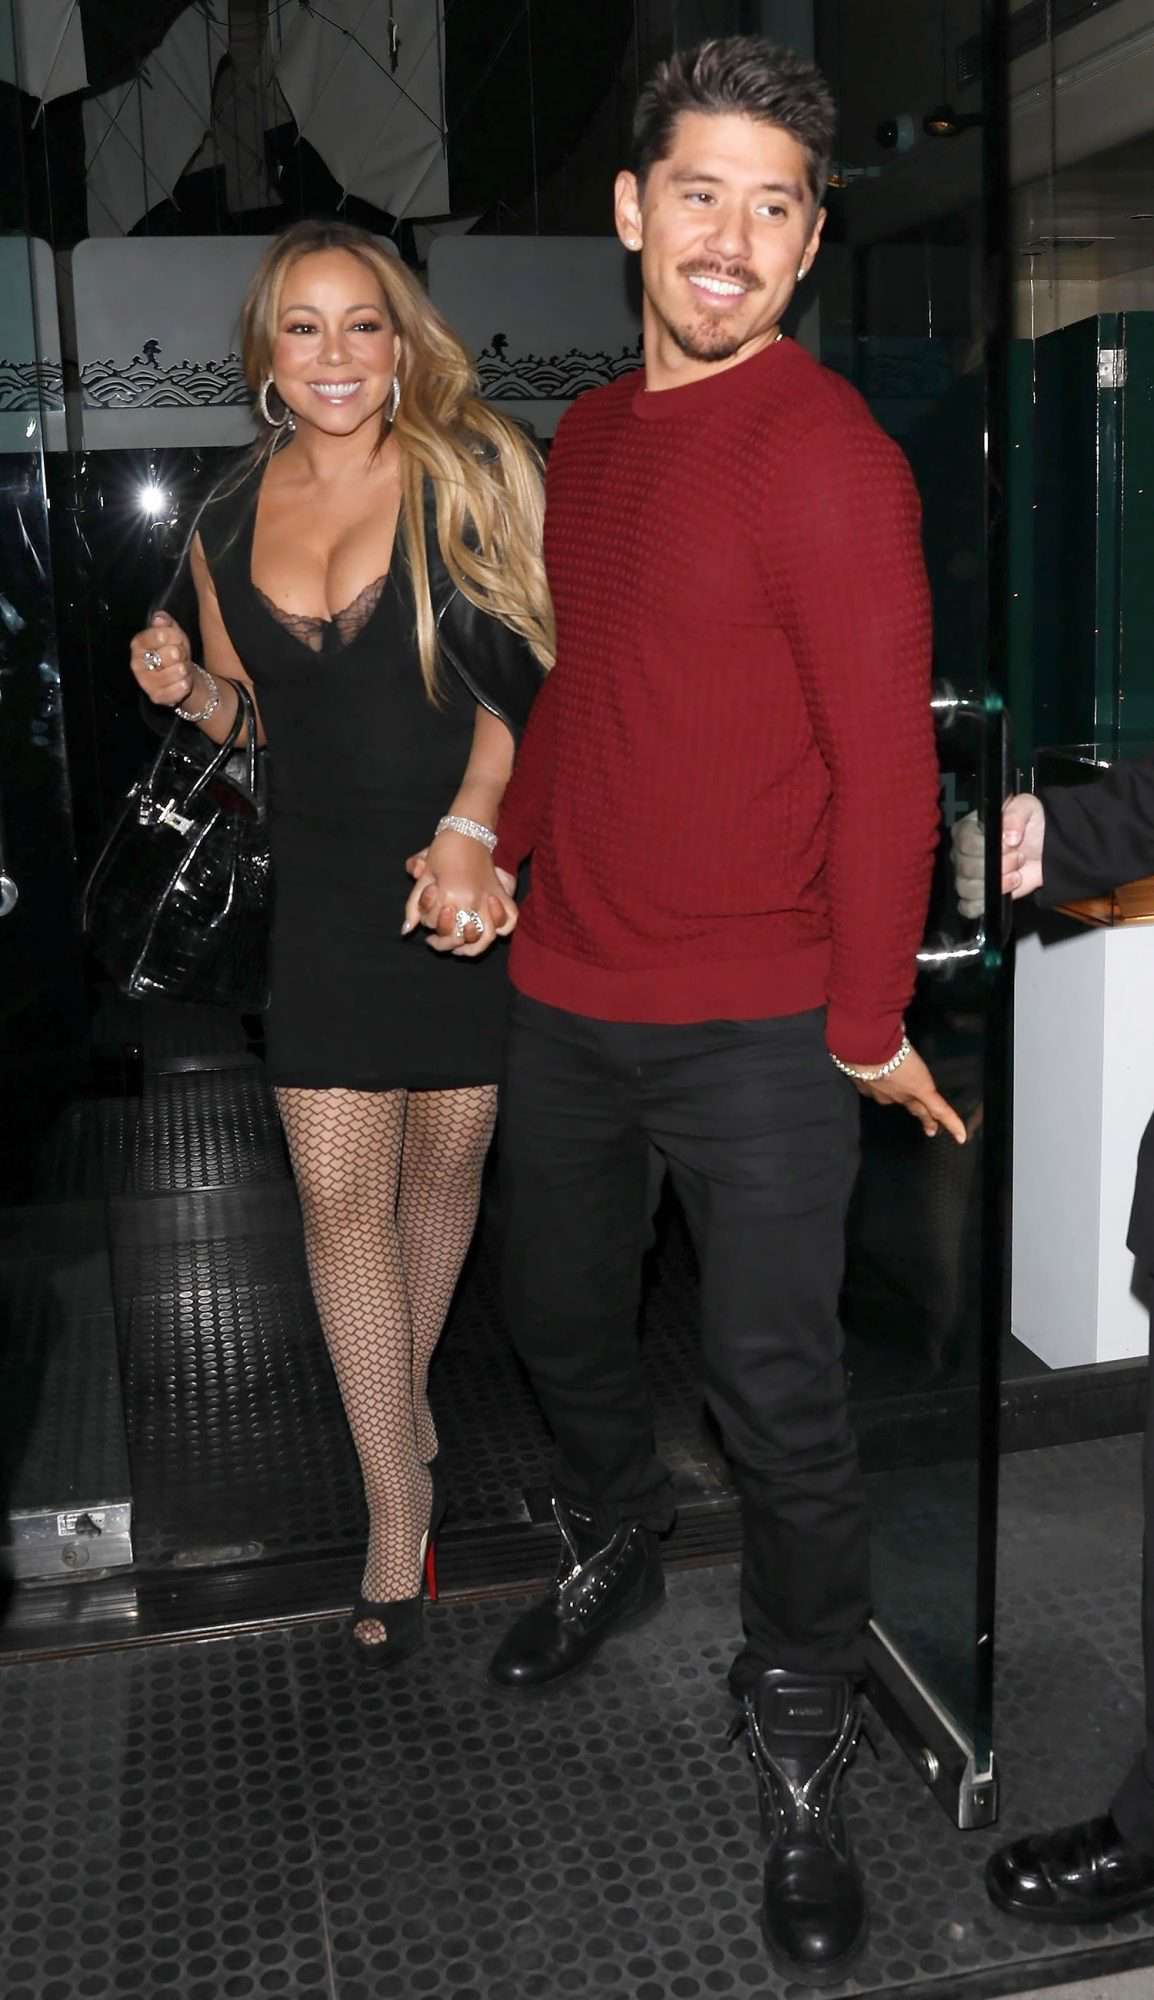 Mariah Carey and Bryan Tanaka out for a date night at Mr. Chow